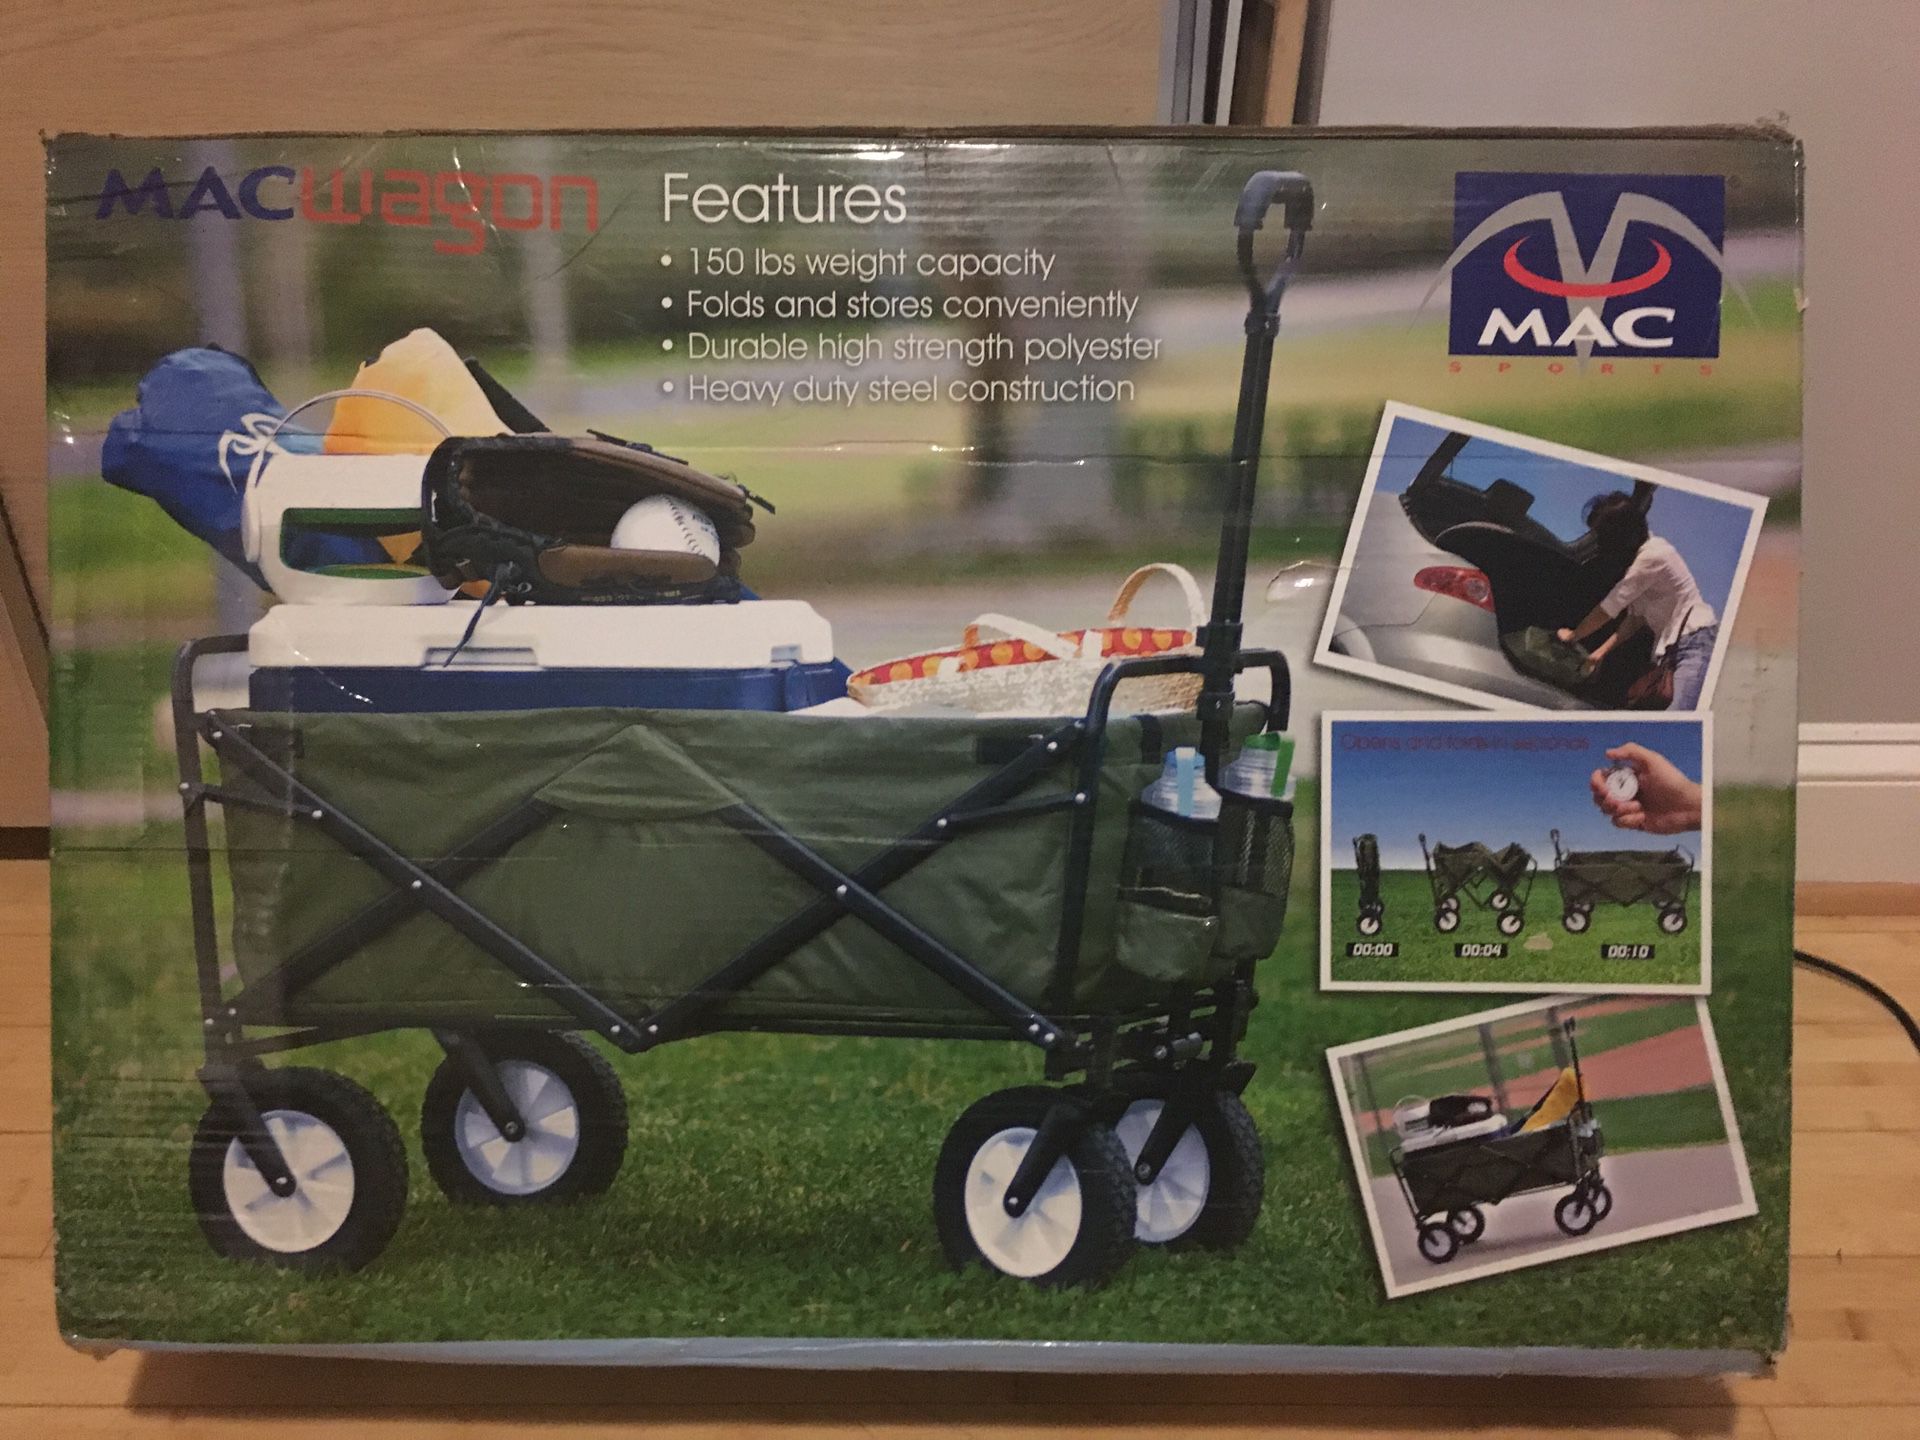 Wagon to carry groceries or other items